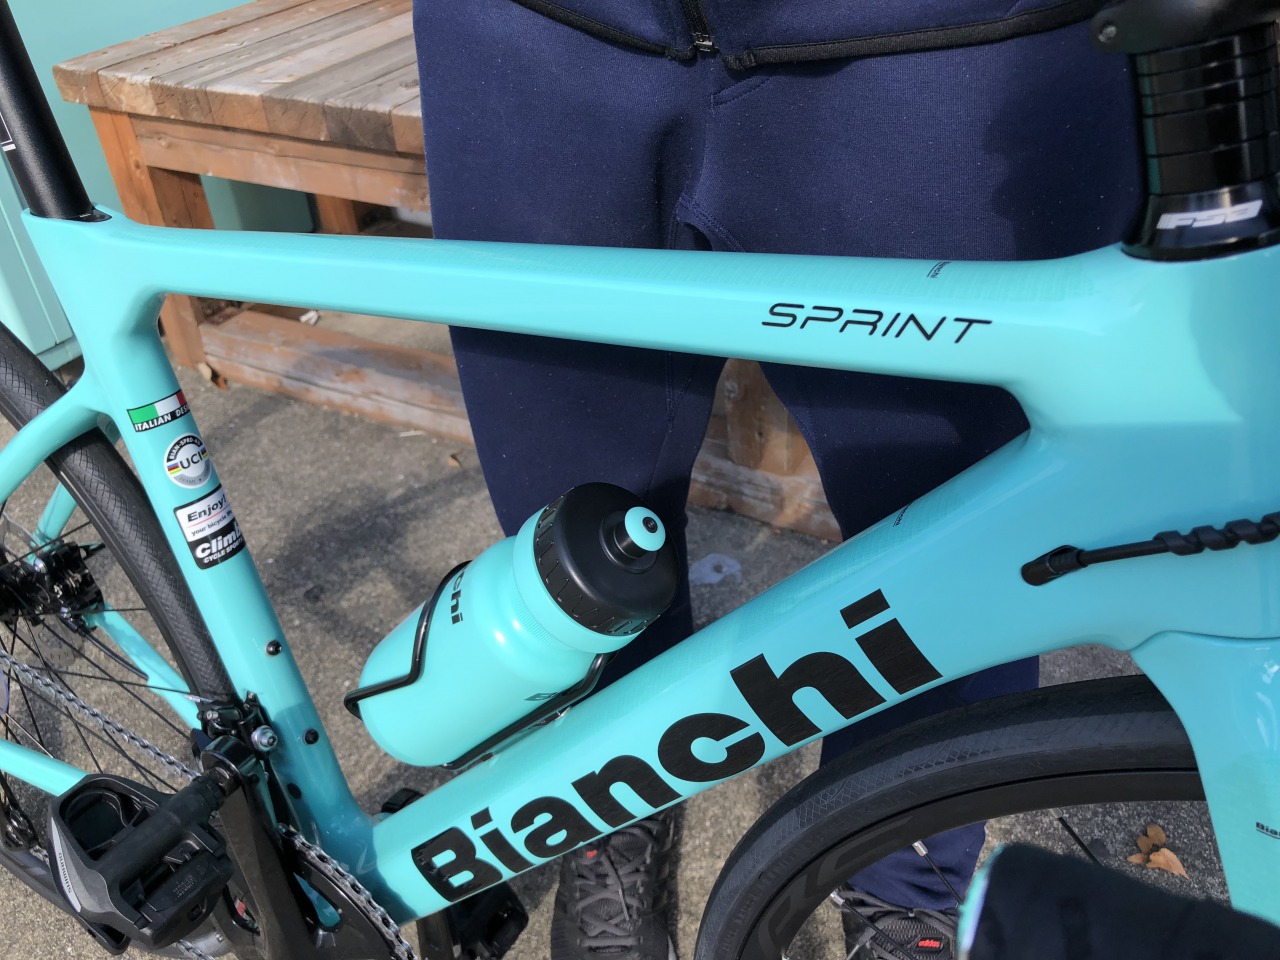 Bianchi SPRINT DISC 納車…from Tさま！ - Climb cycle sports